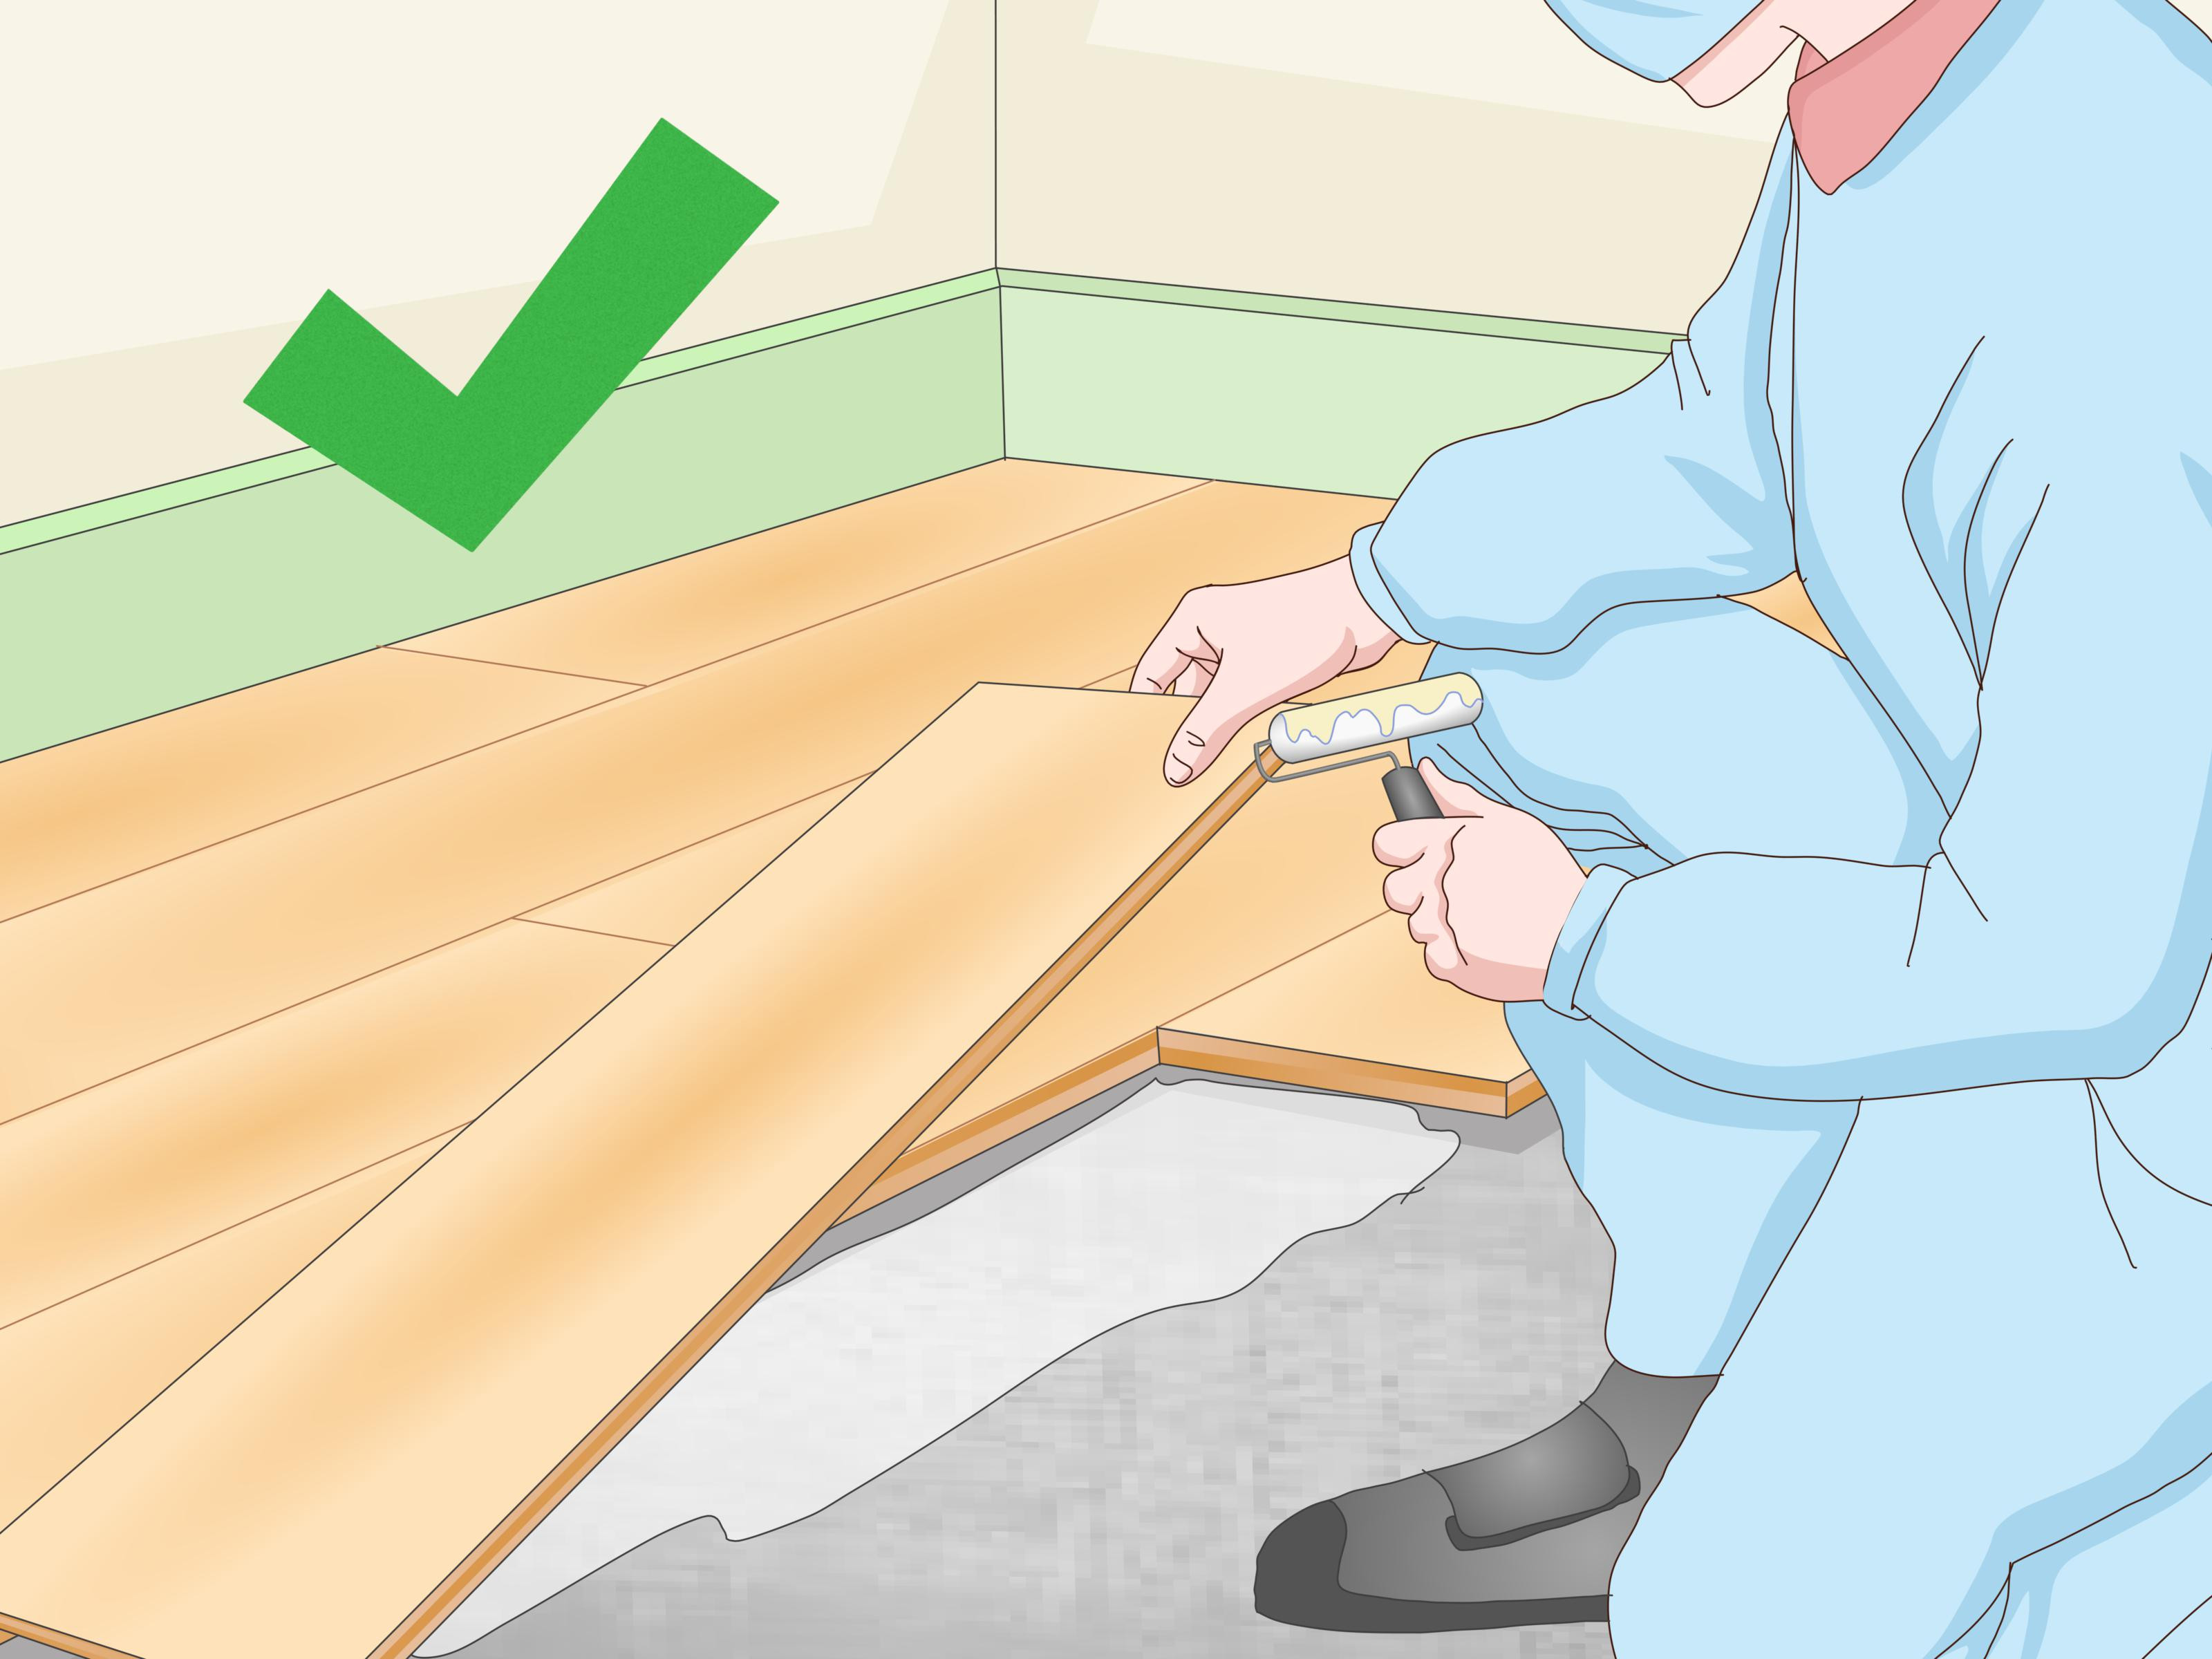 hardwood floor cleaning tools of 3 ways to close gaps in laminate flooring wikihow with regard to close gaps in laminate flooring step 13